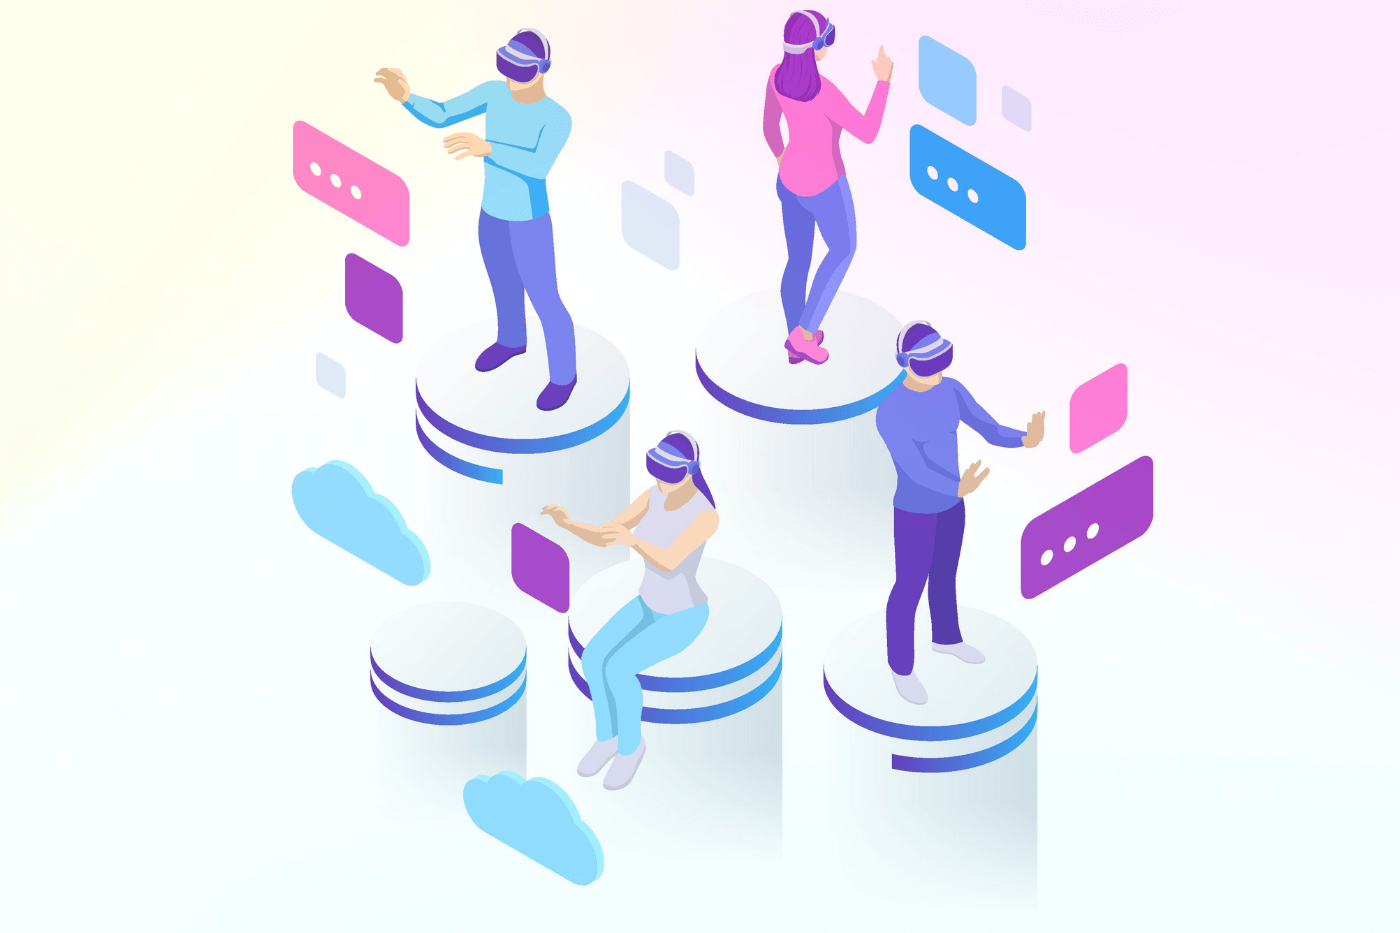 Isometric customer experience (CX) in virtual reality, augmented reality concept. Men and woman wearing virtual reality glasses.